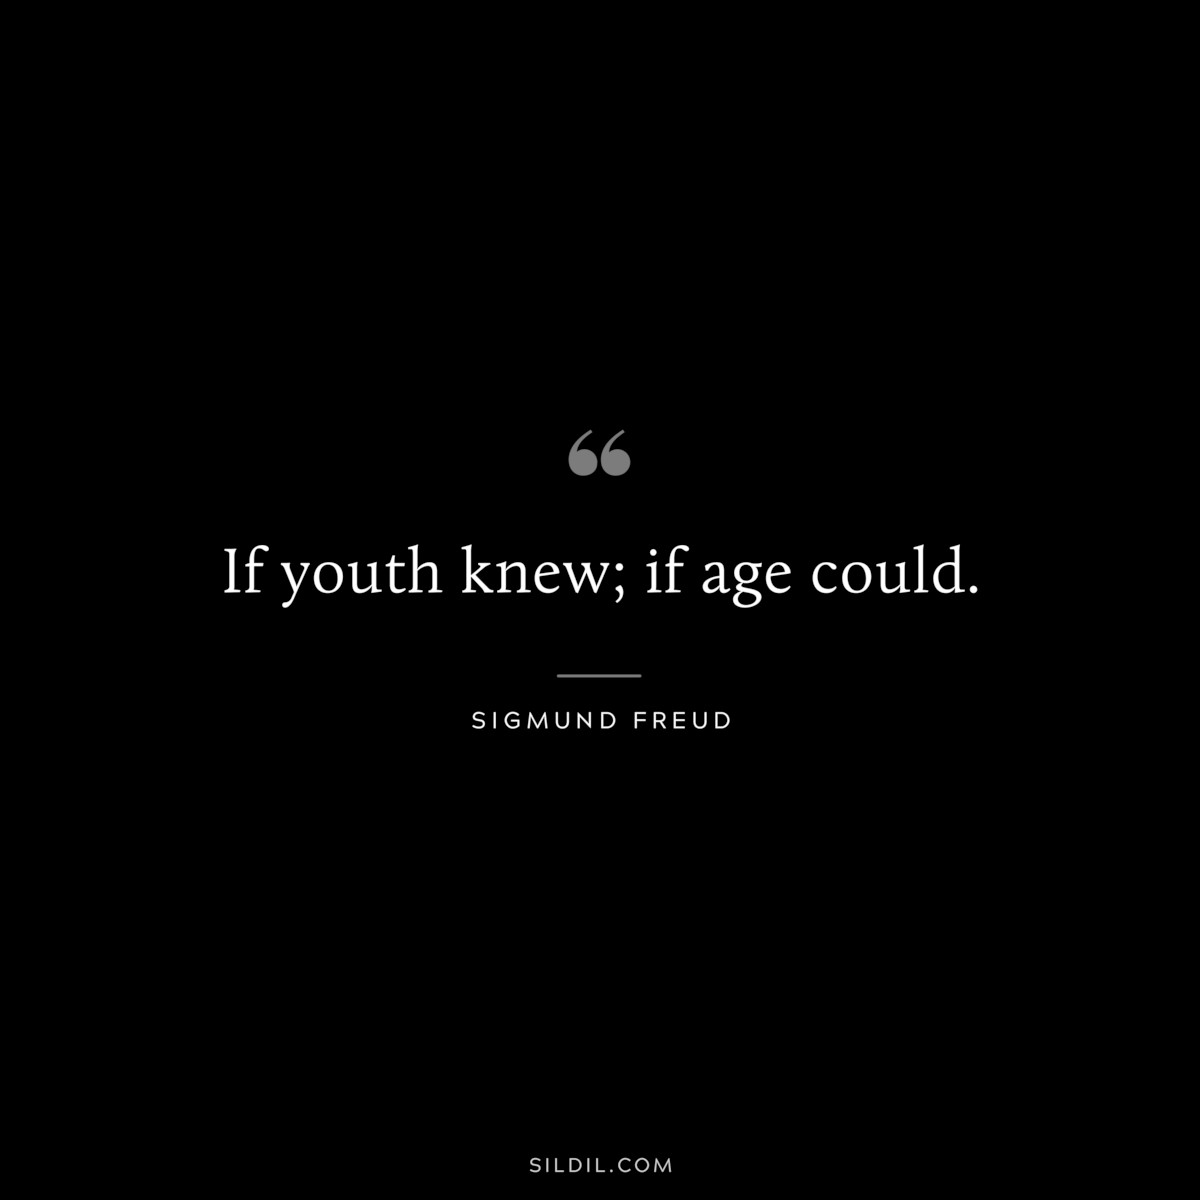 If youth knew; if age could. ― Sigmund Frued